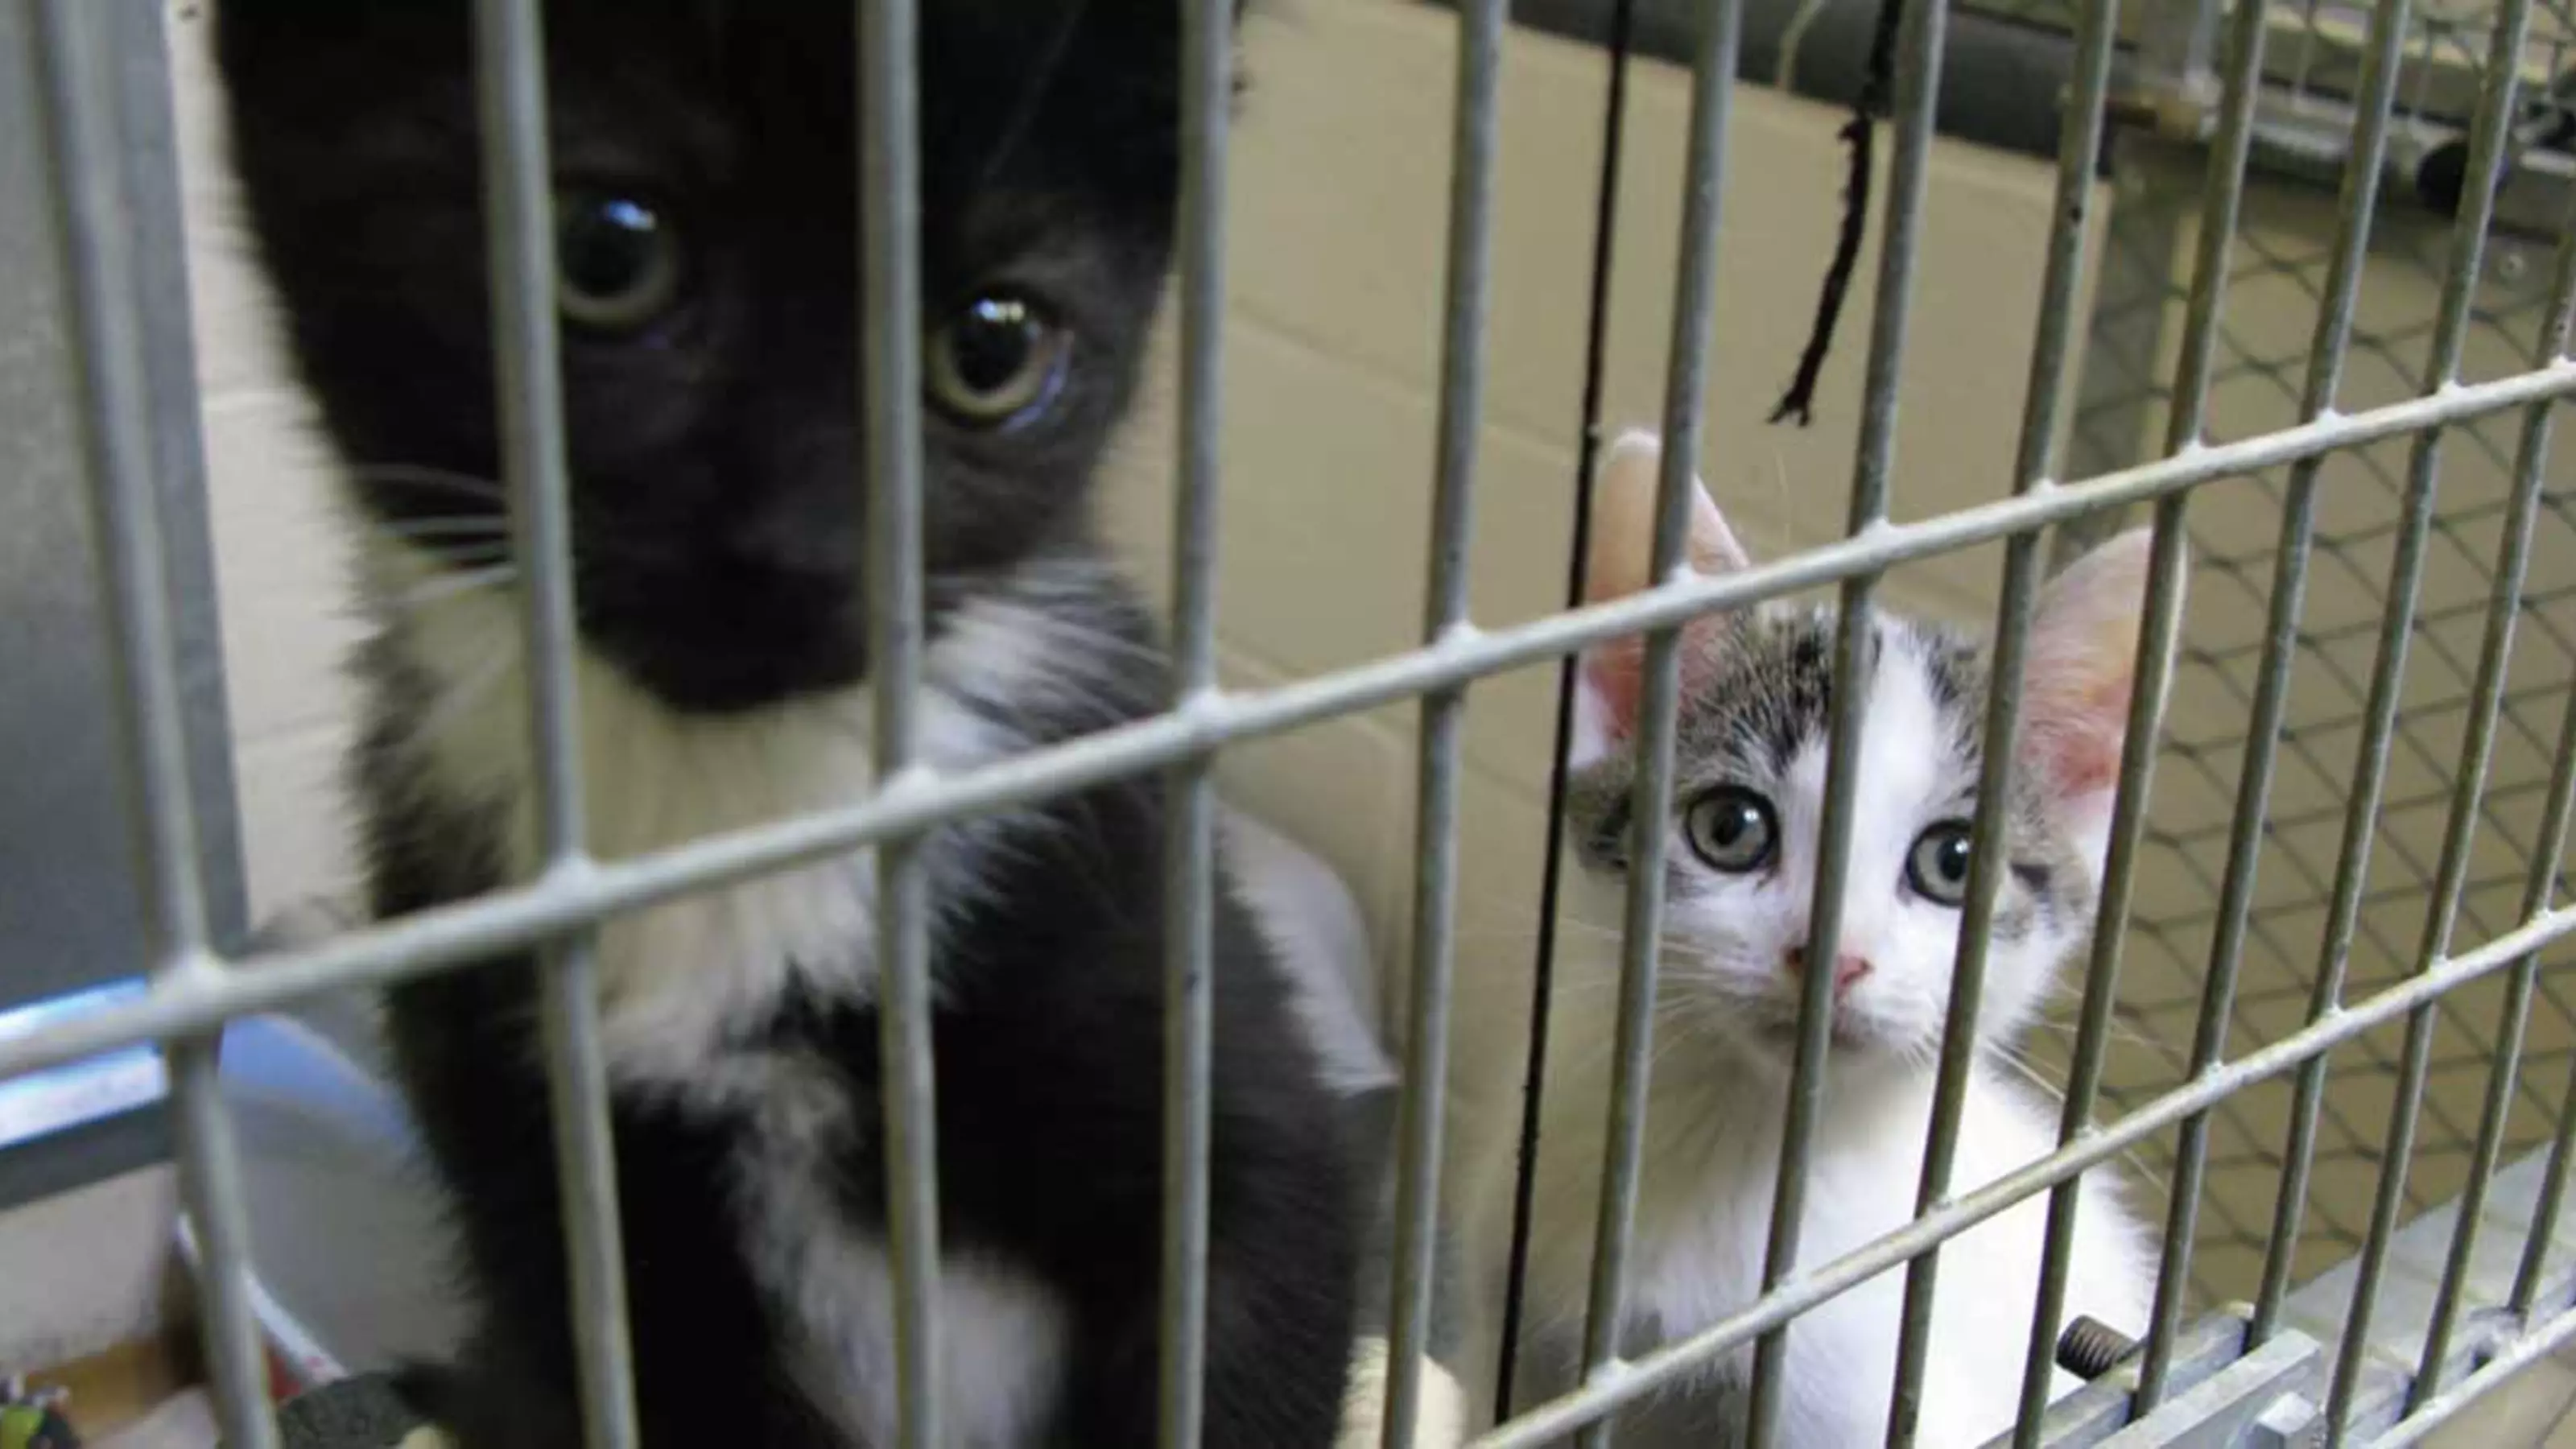 Kittens behind bars in a cage